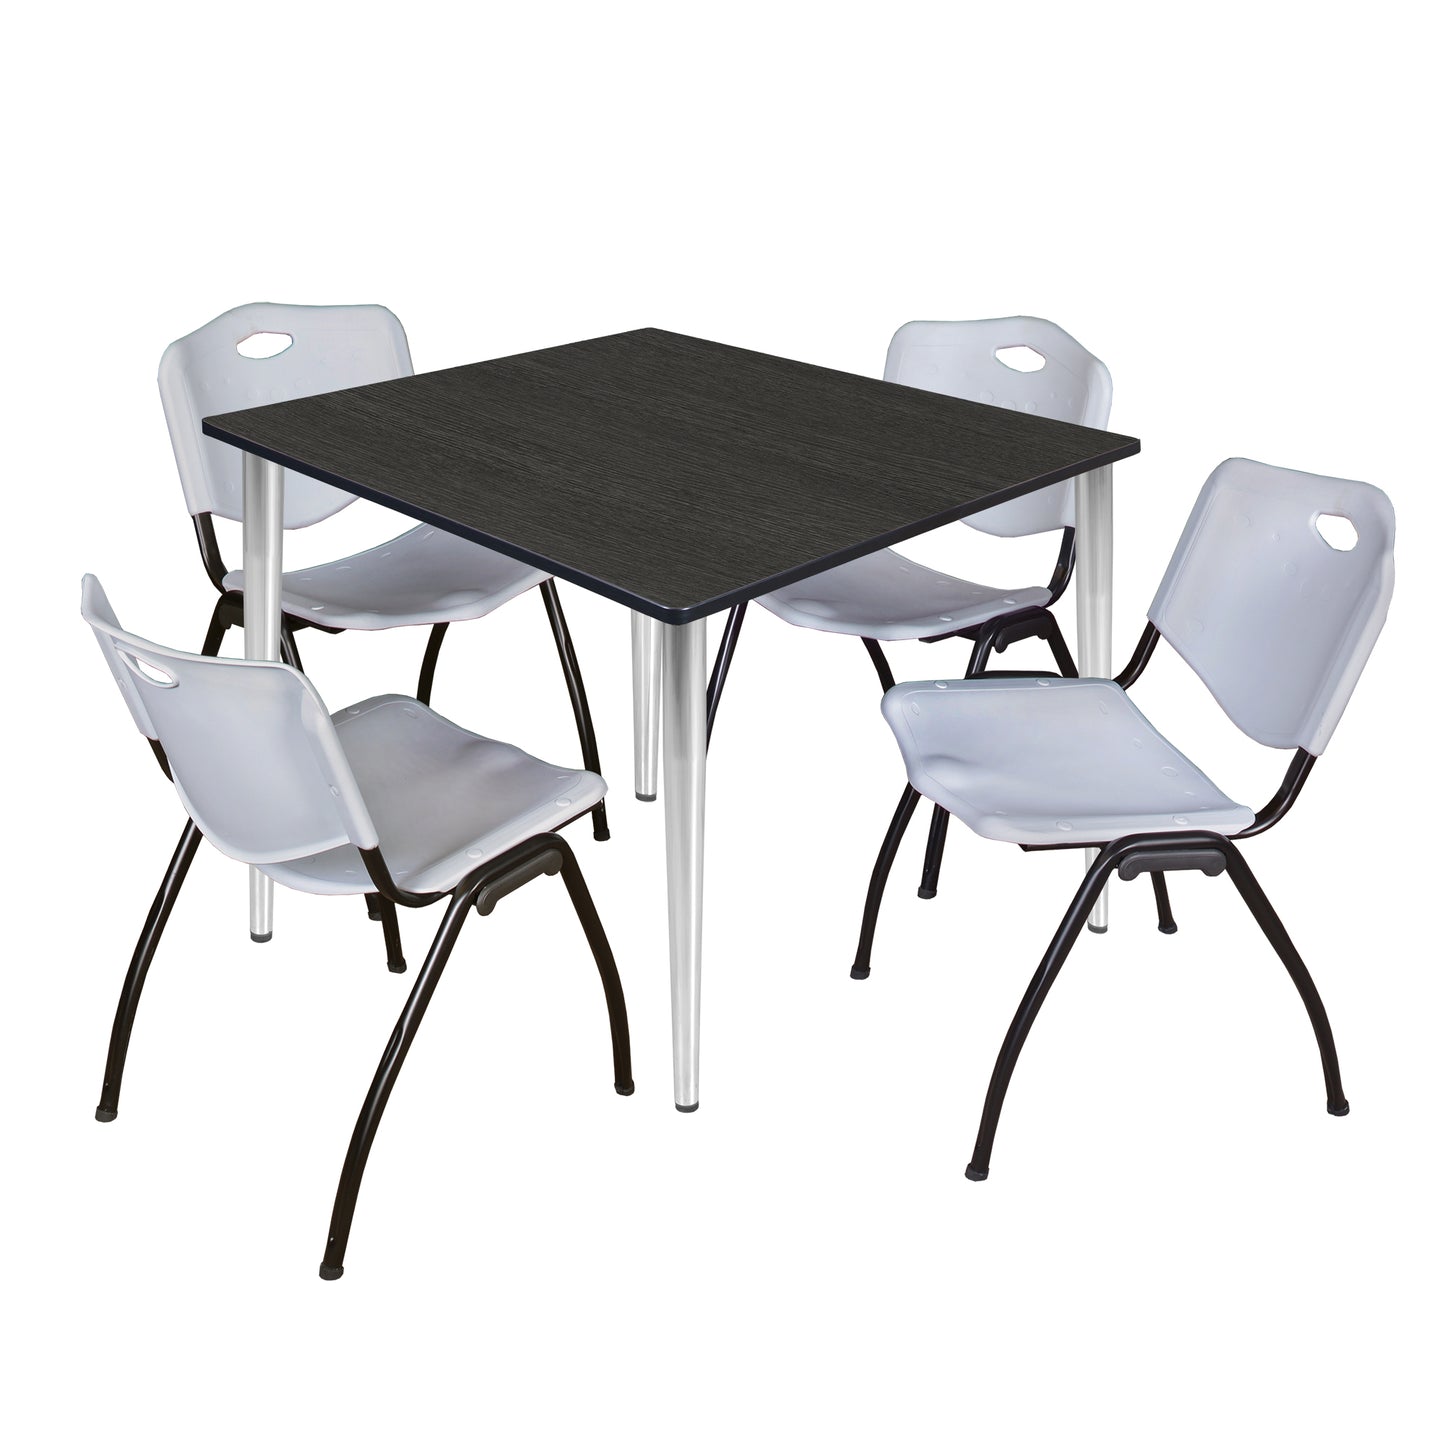 Regency Kahlo 48 in. Square Breakroom Table & 4 M Stack Chairs